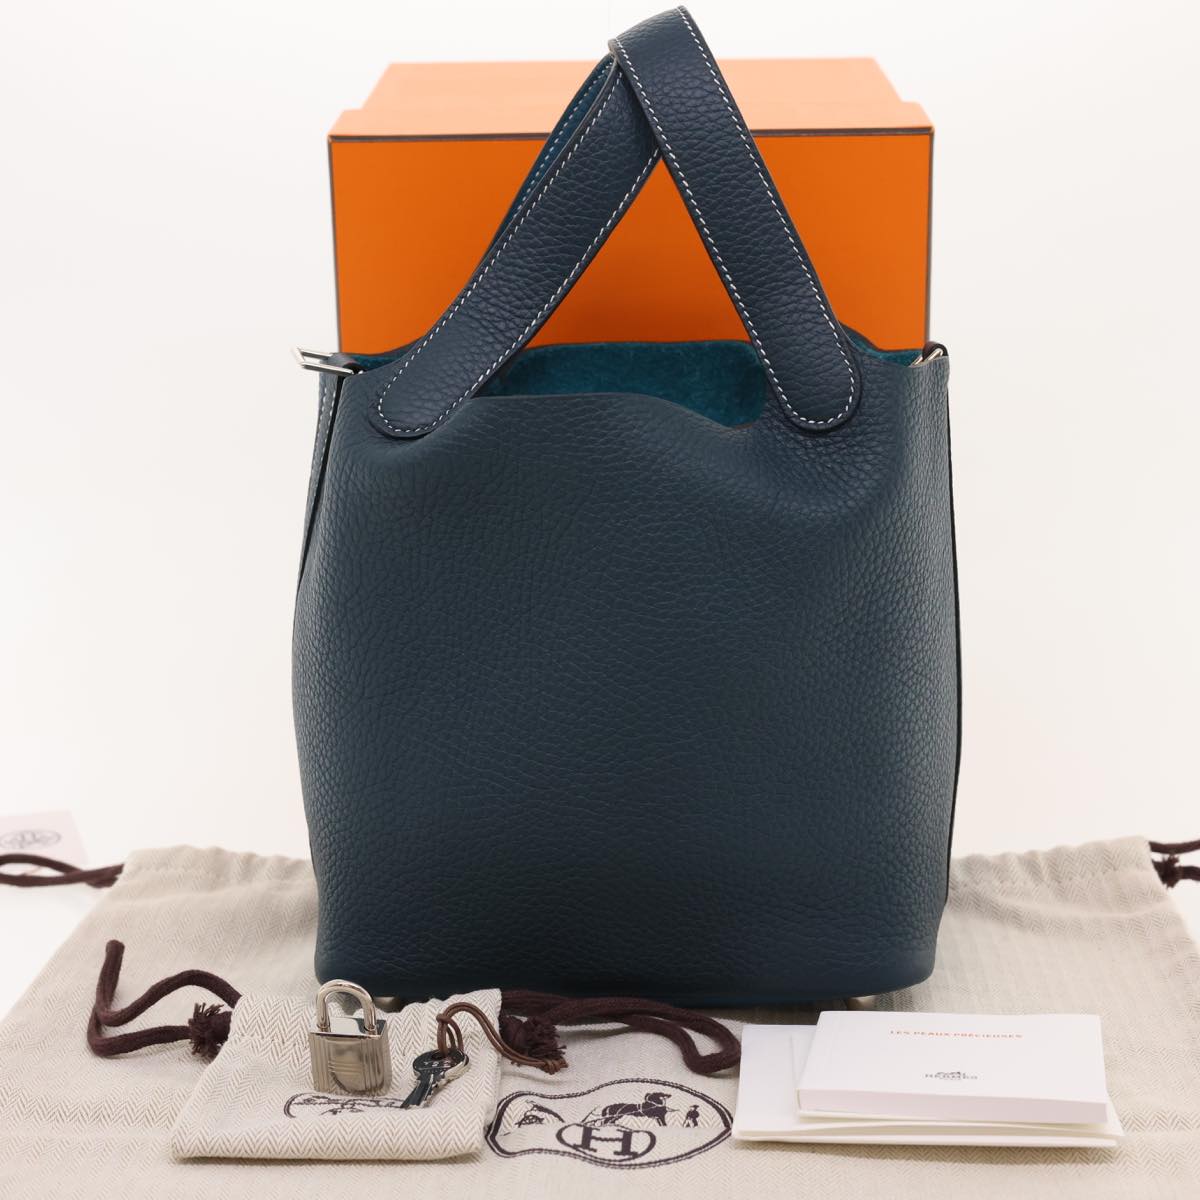 HERMES Picotin Rock 18 PM Hand Bag Taurillon Clemence Blue Green Auth 27689A